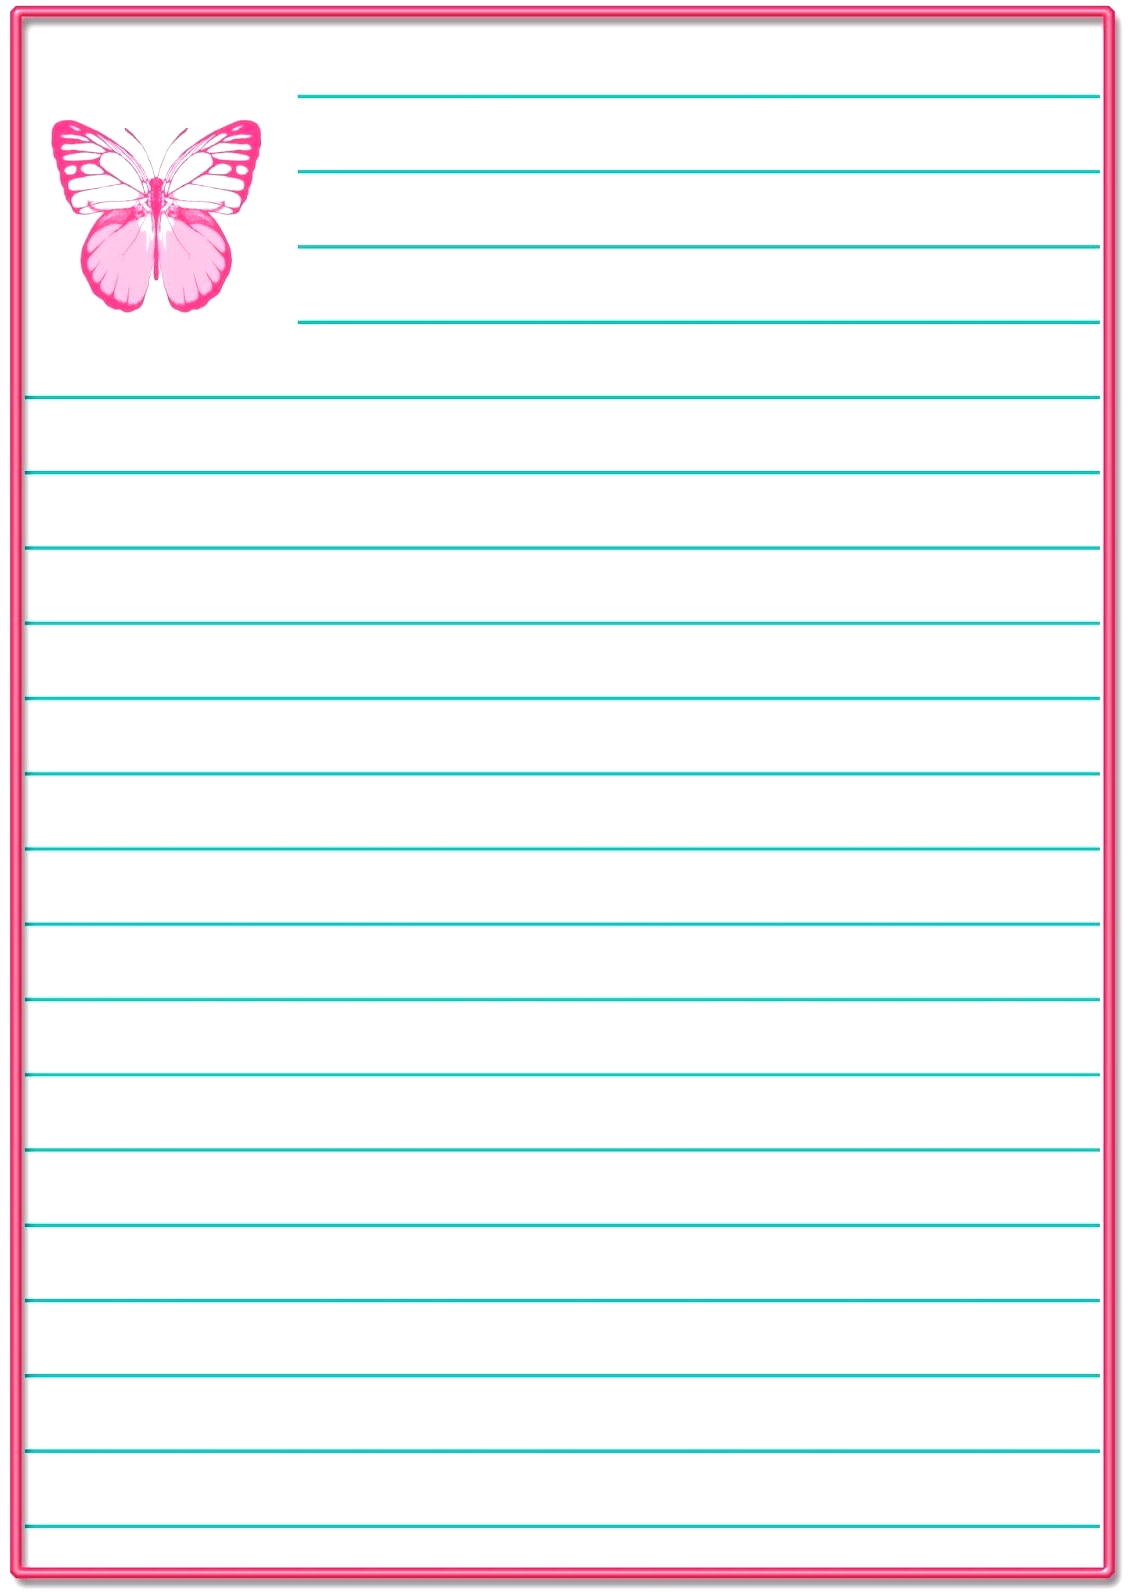 free-printable-stationery-with-lines